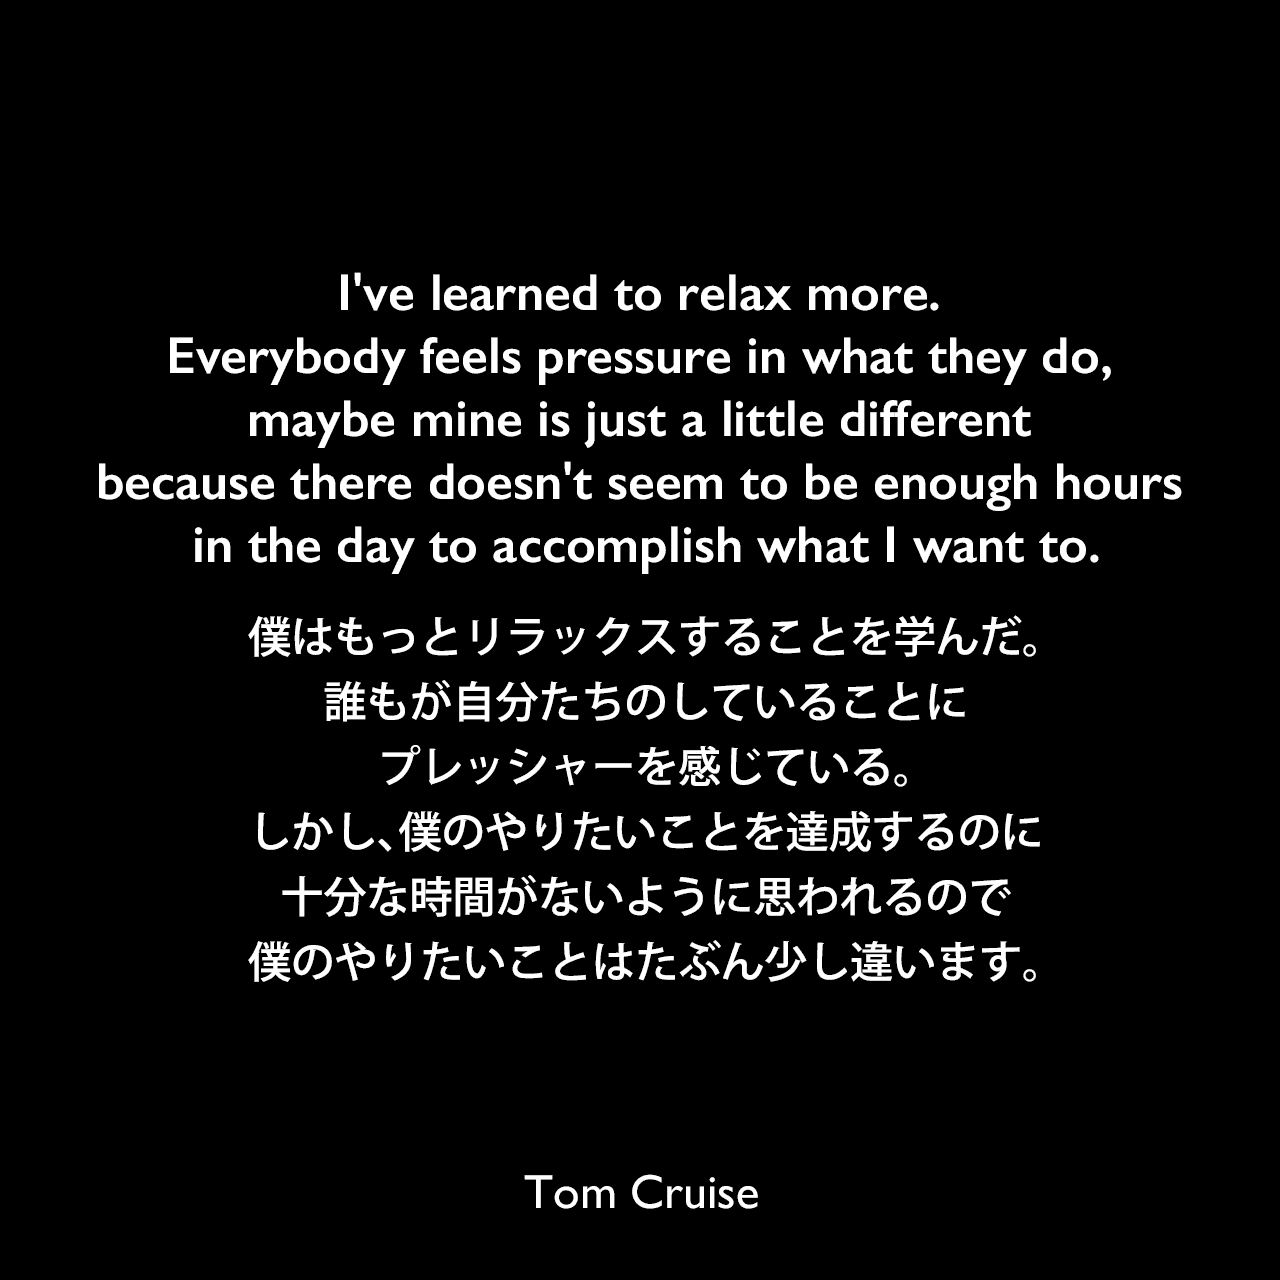 I've learned to relax more. Everybody feels pressure in what they do, maybe mine is just a little different because there doesn't seem to be enough hours in the day to accomplish what I want to.僕はもっとリラックスすることを学んだ。誰もが自分たちのしていることにプレッシャーを感じている。しかし、僕のやりたいことを達成するのに十分な時間がないように思われるので、僕のやりたいことはたぶん少し違います。Tom Cruise